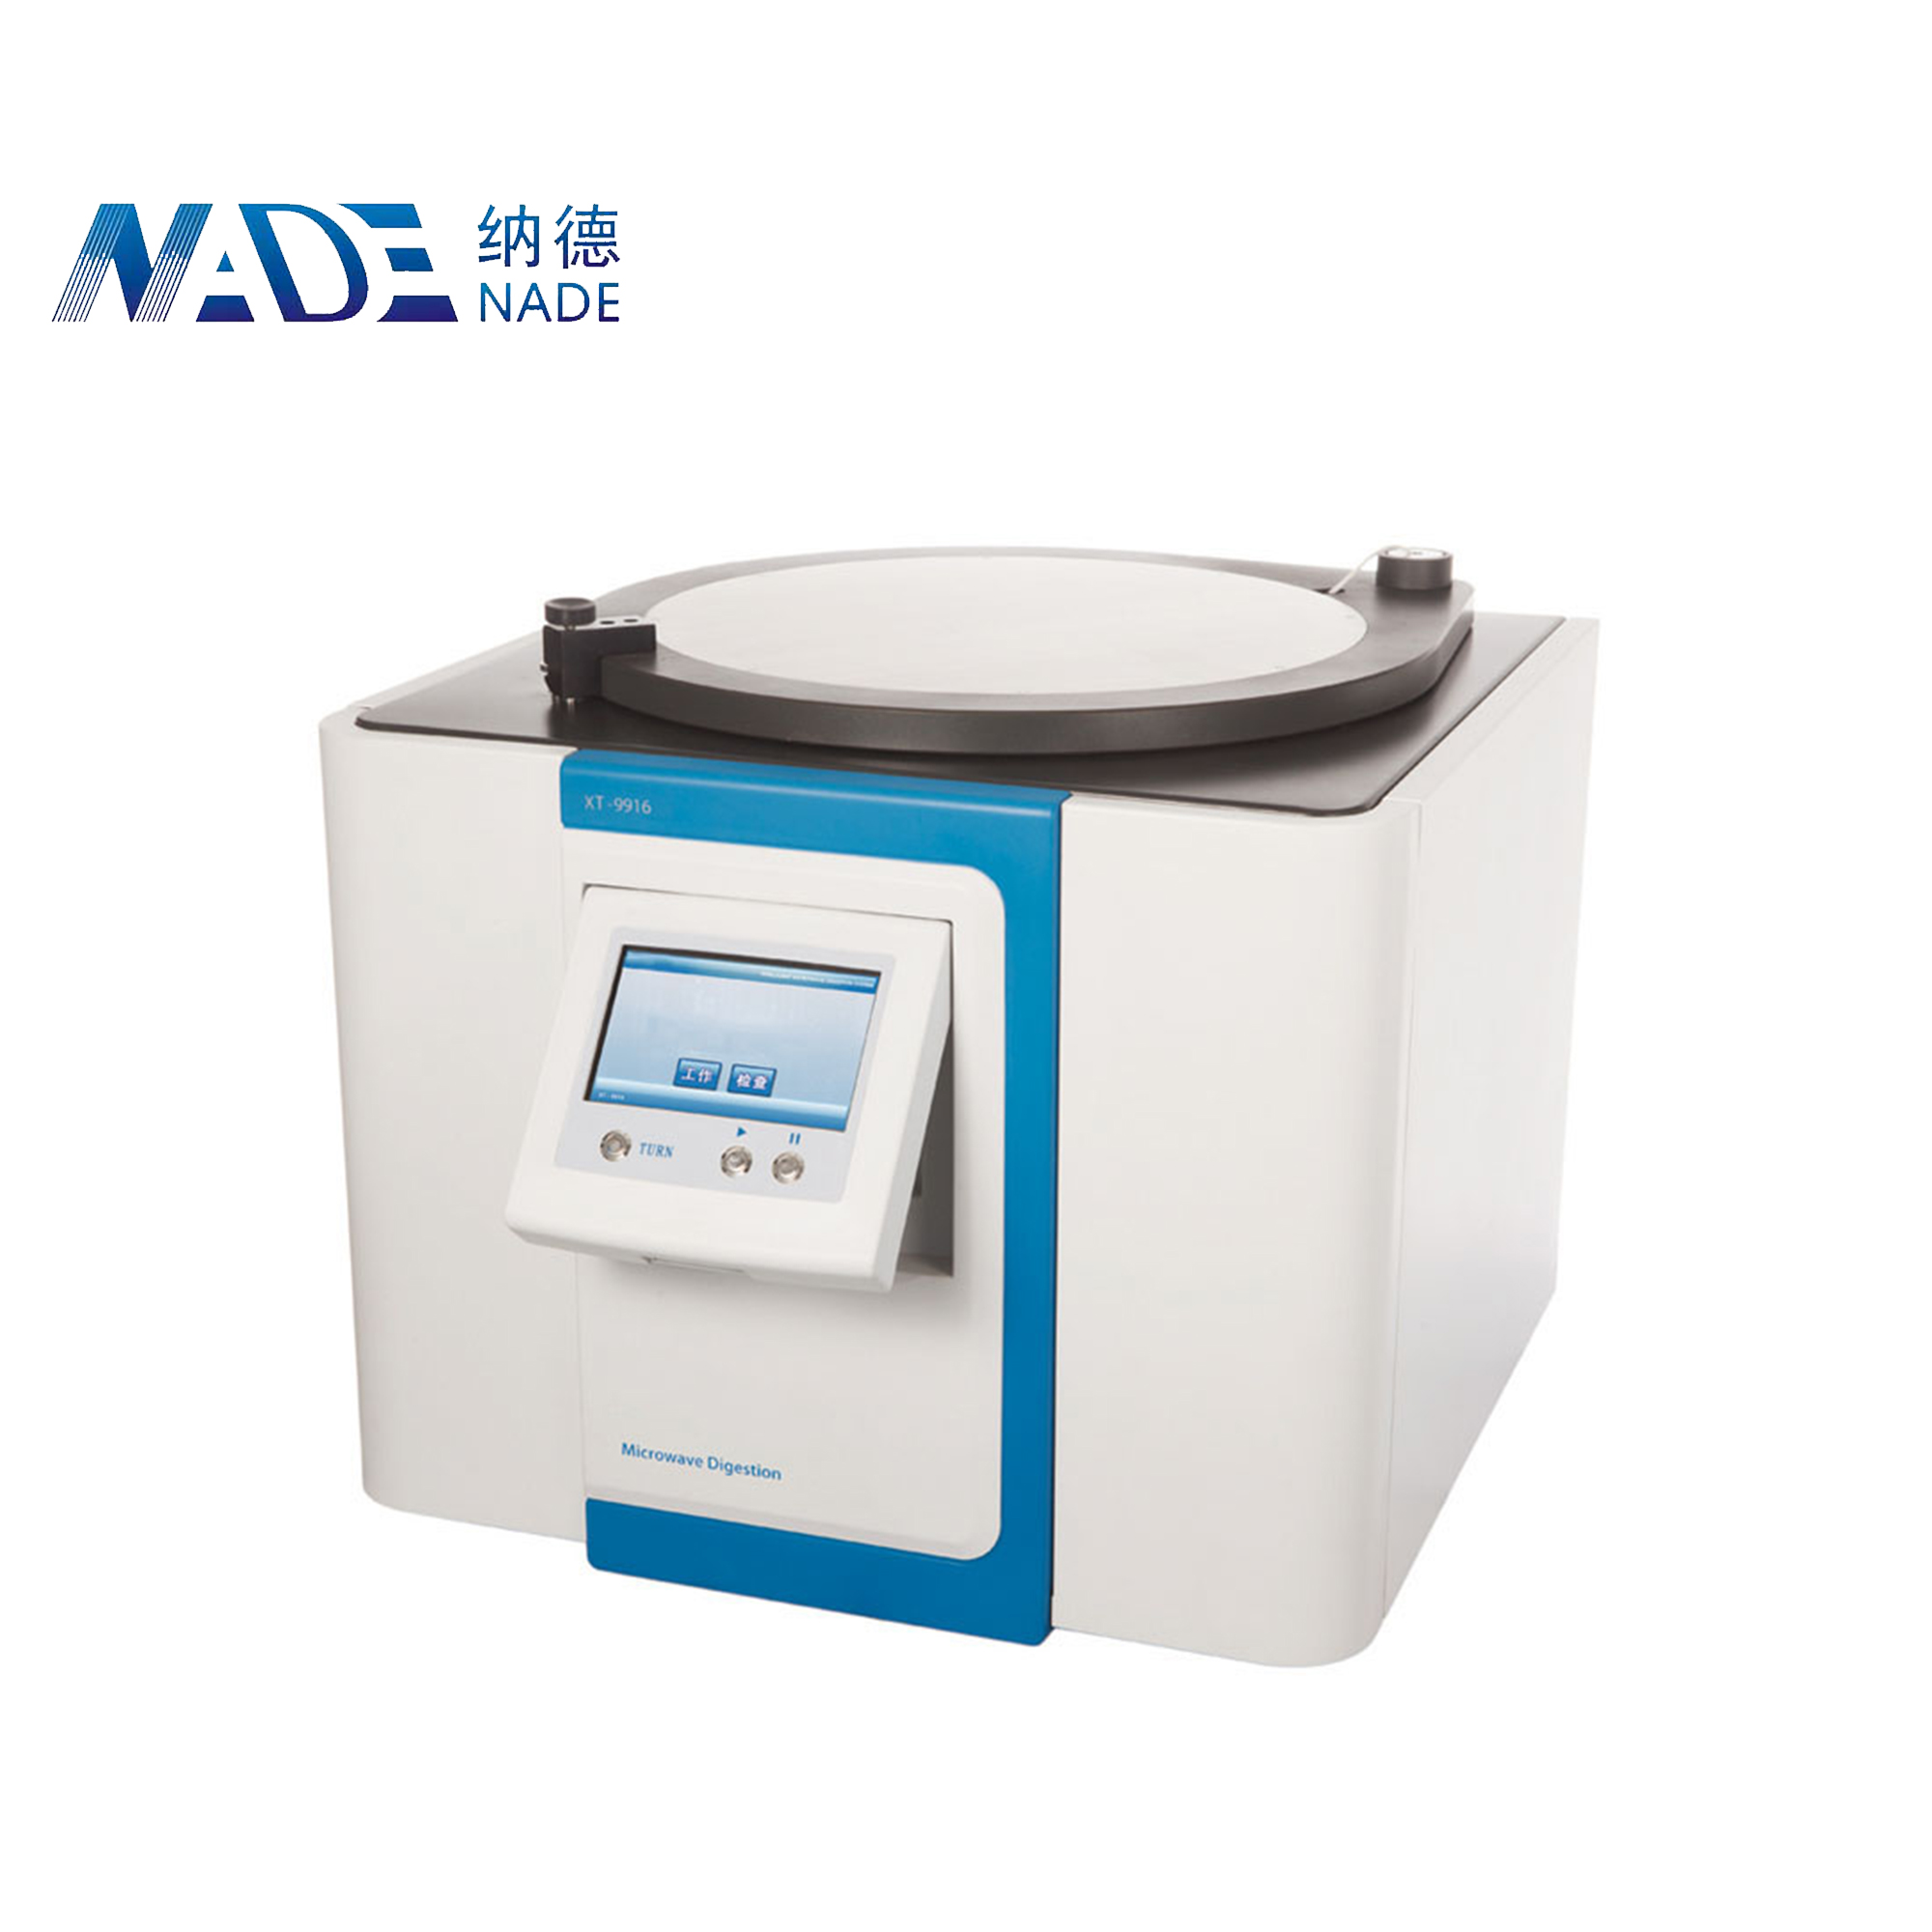 NADE Testing Equipment Intelligent Microwave Digestion System XT-9916